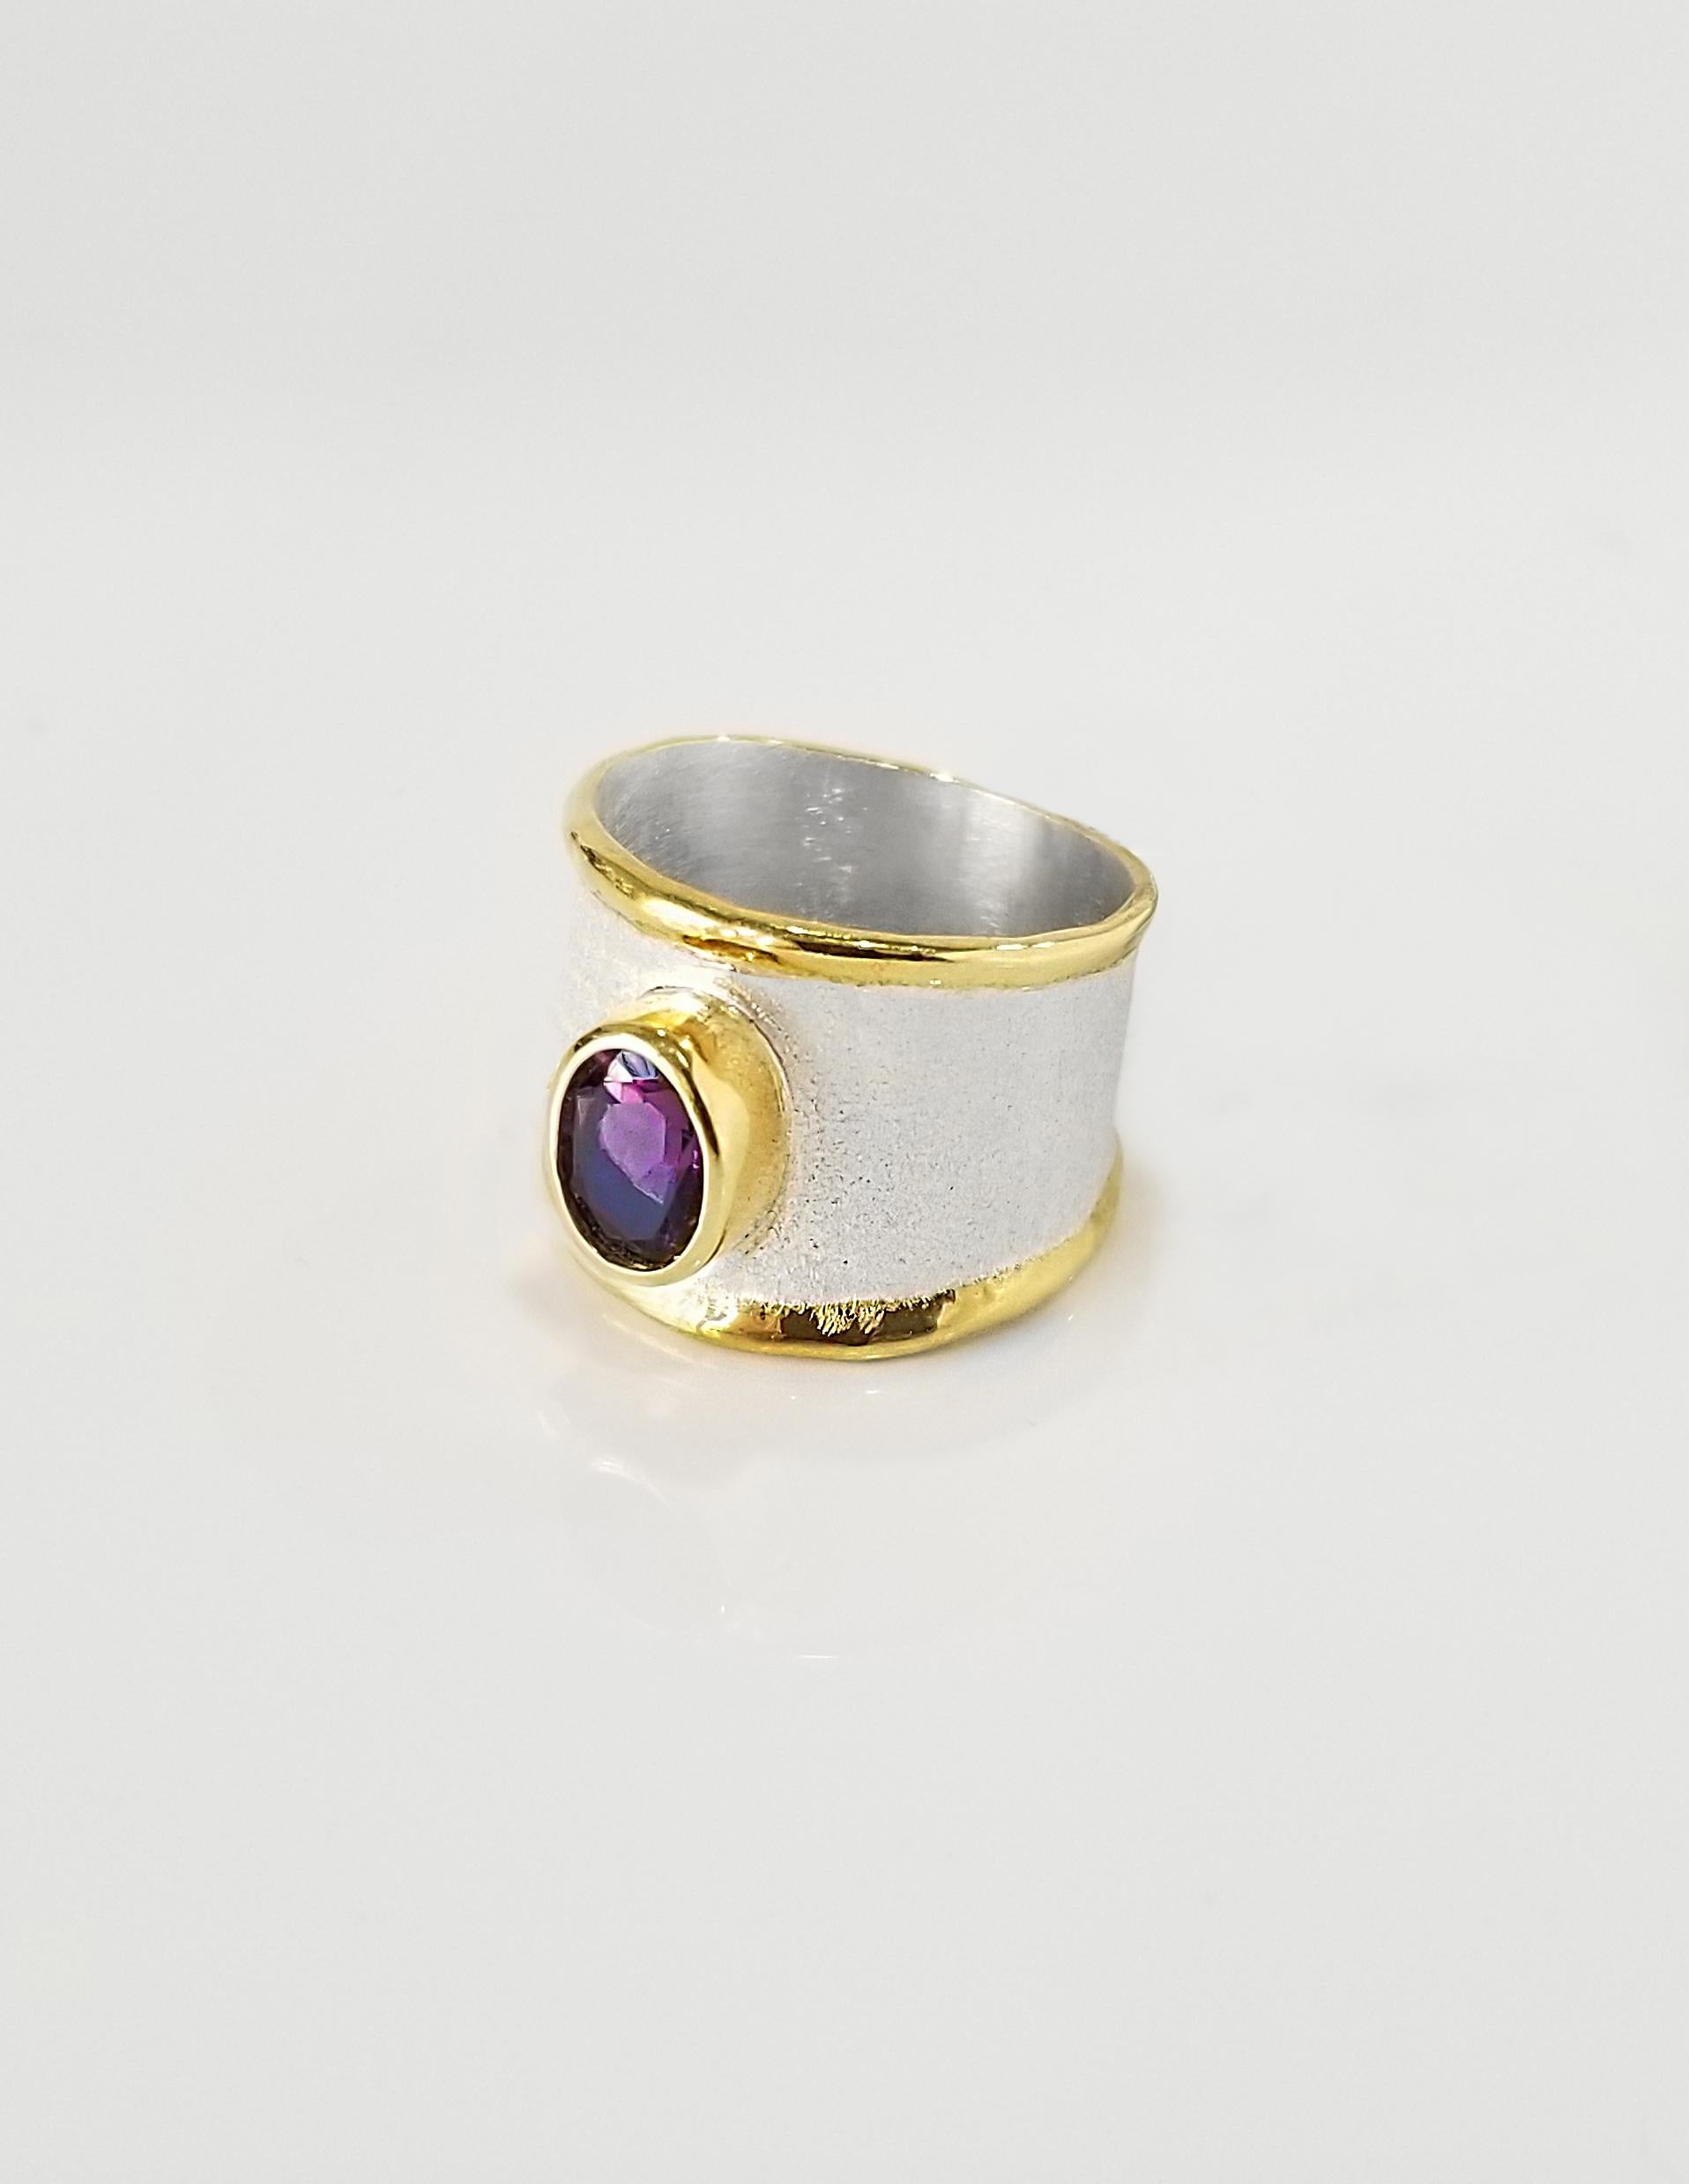 Yianni Creations Midas Collection 100% Handmade Artisan Ring from Fine Silver with a layover of 24 Karat Yellow Gold features 1.75 Carat Amethyst complimented by unique techniques of craftsmanship - brushed texture and nature-inspired liquid edges.